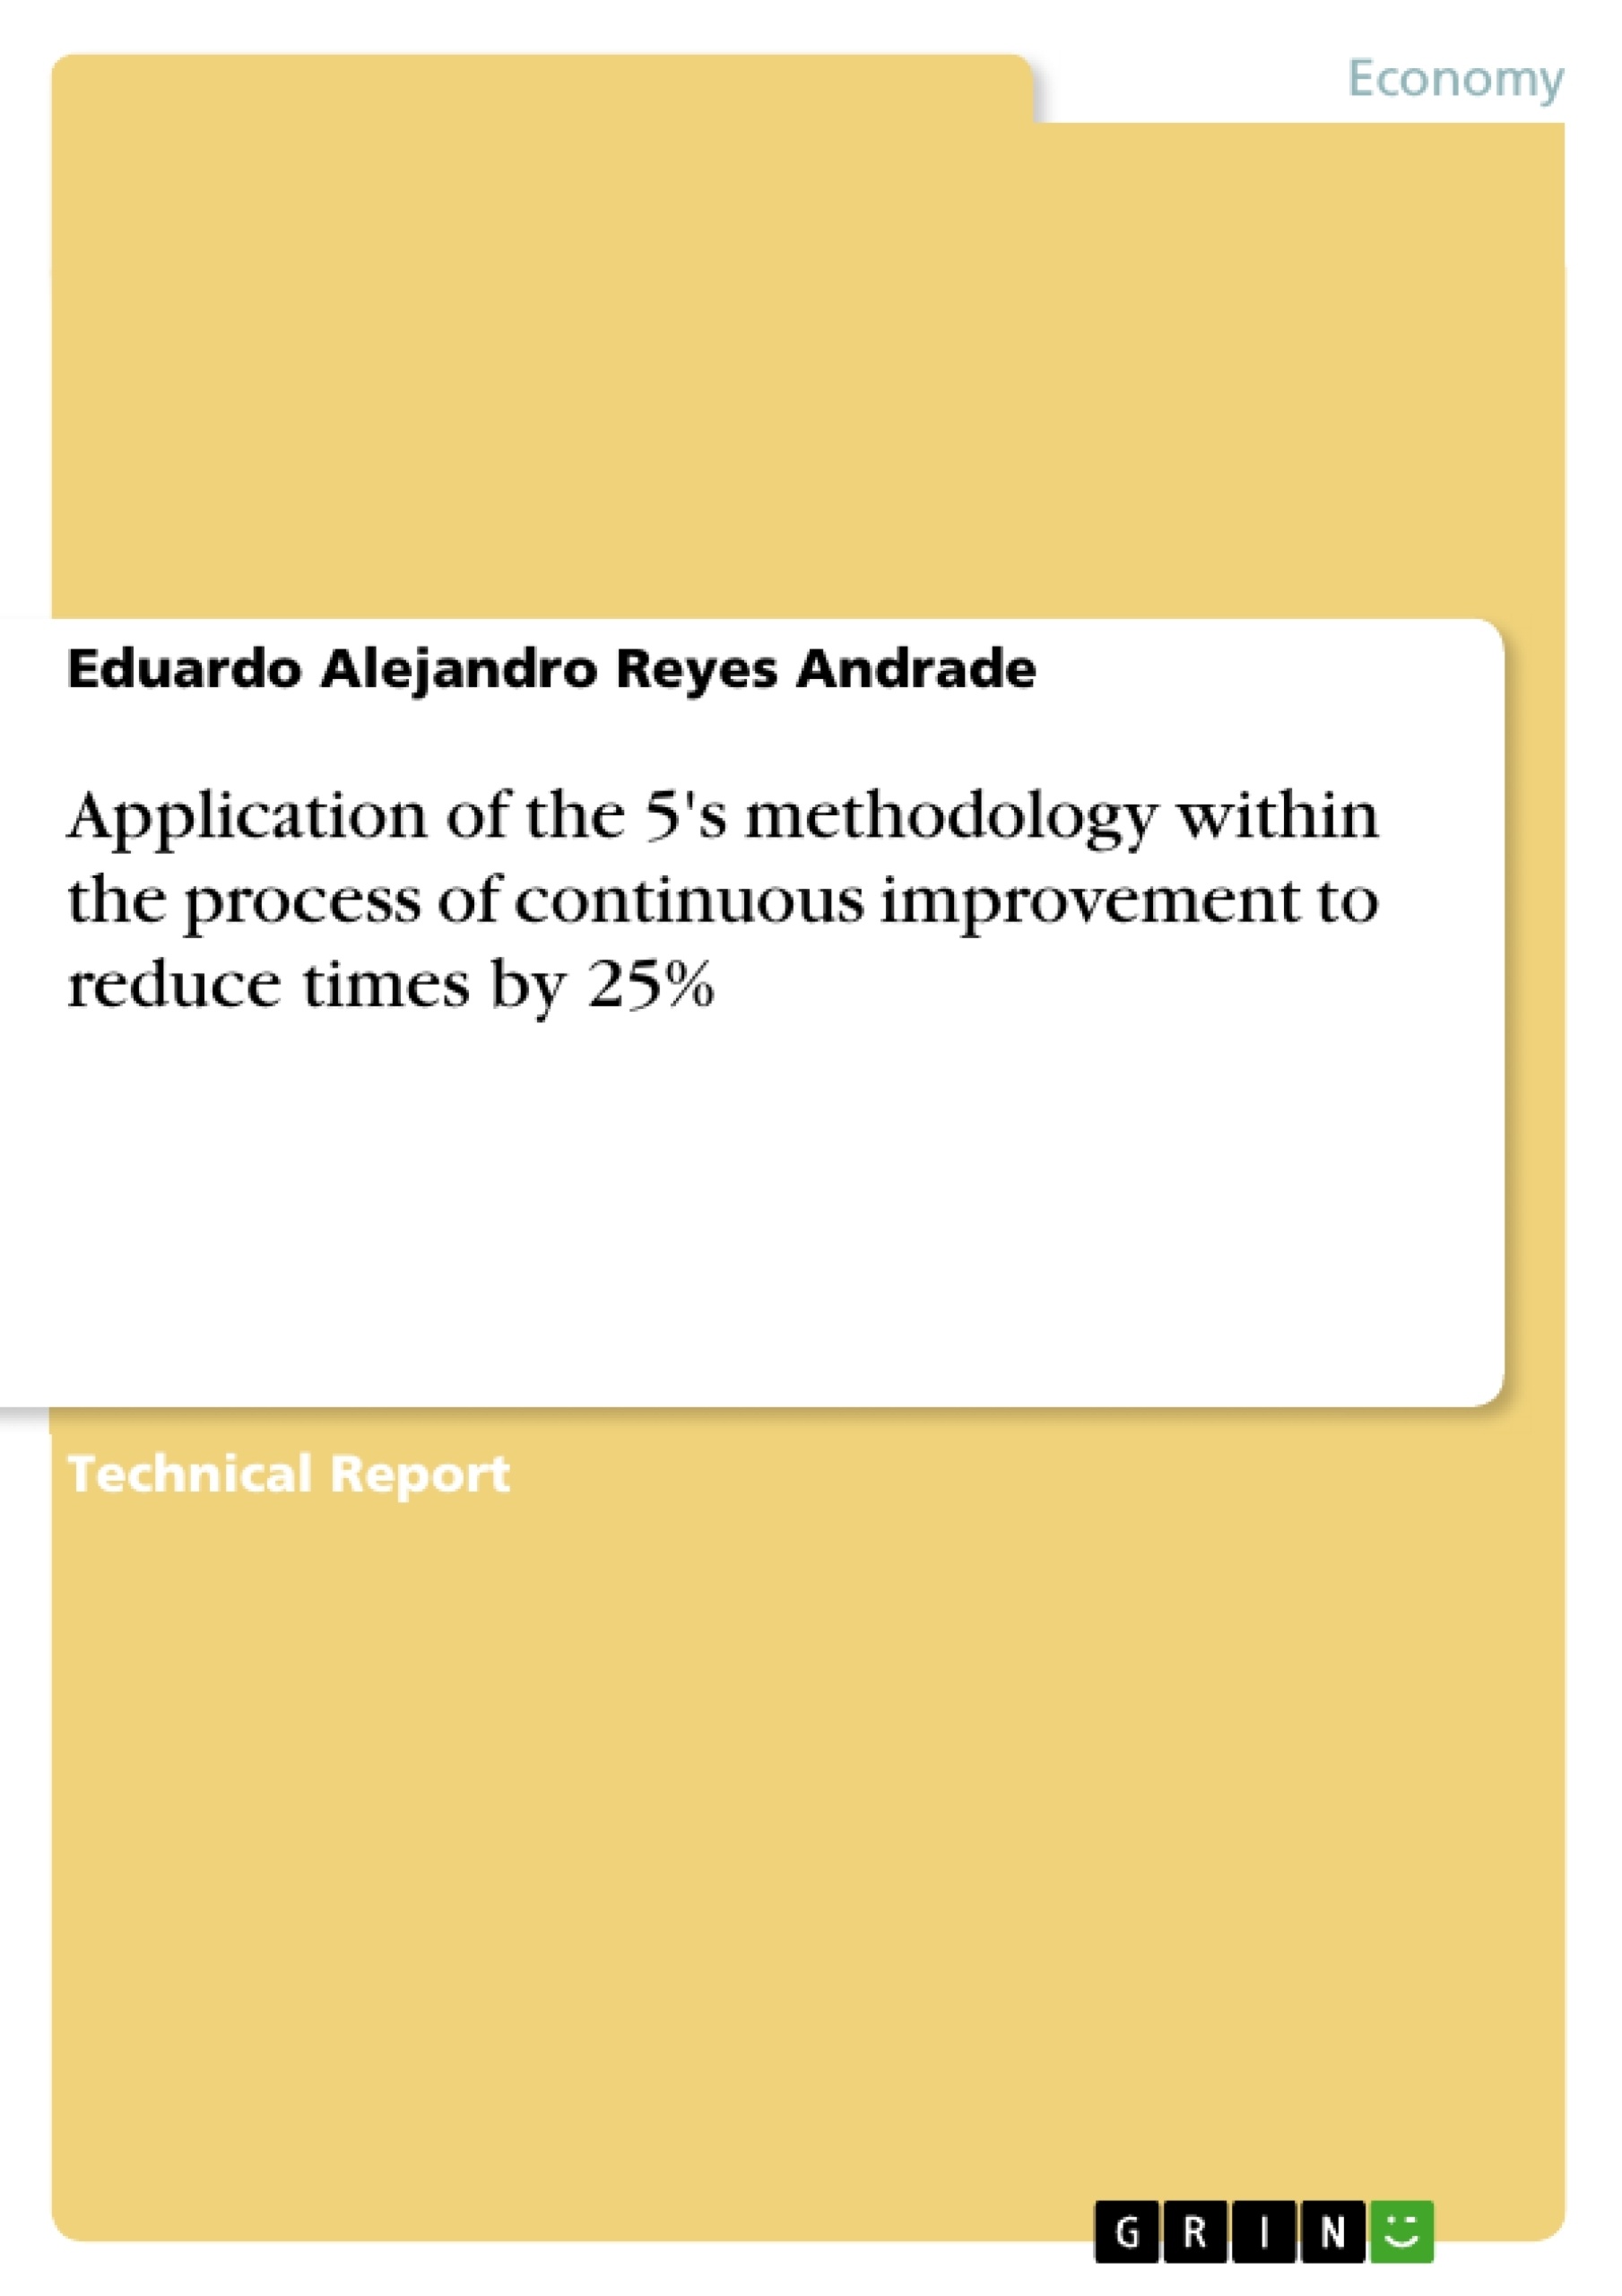 Title: Application of the 5's methodology within the process of continuous improvement to reduce times by 25%